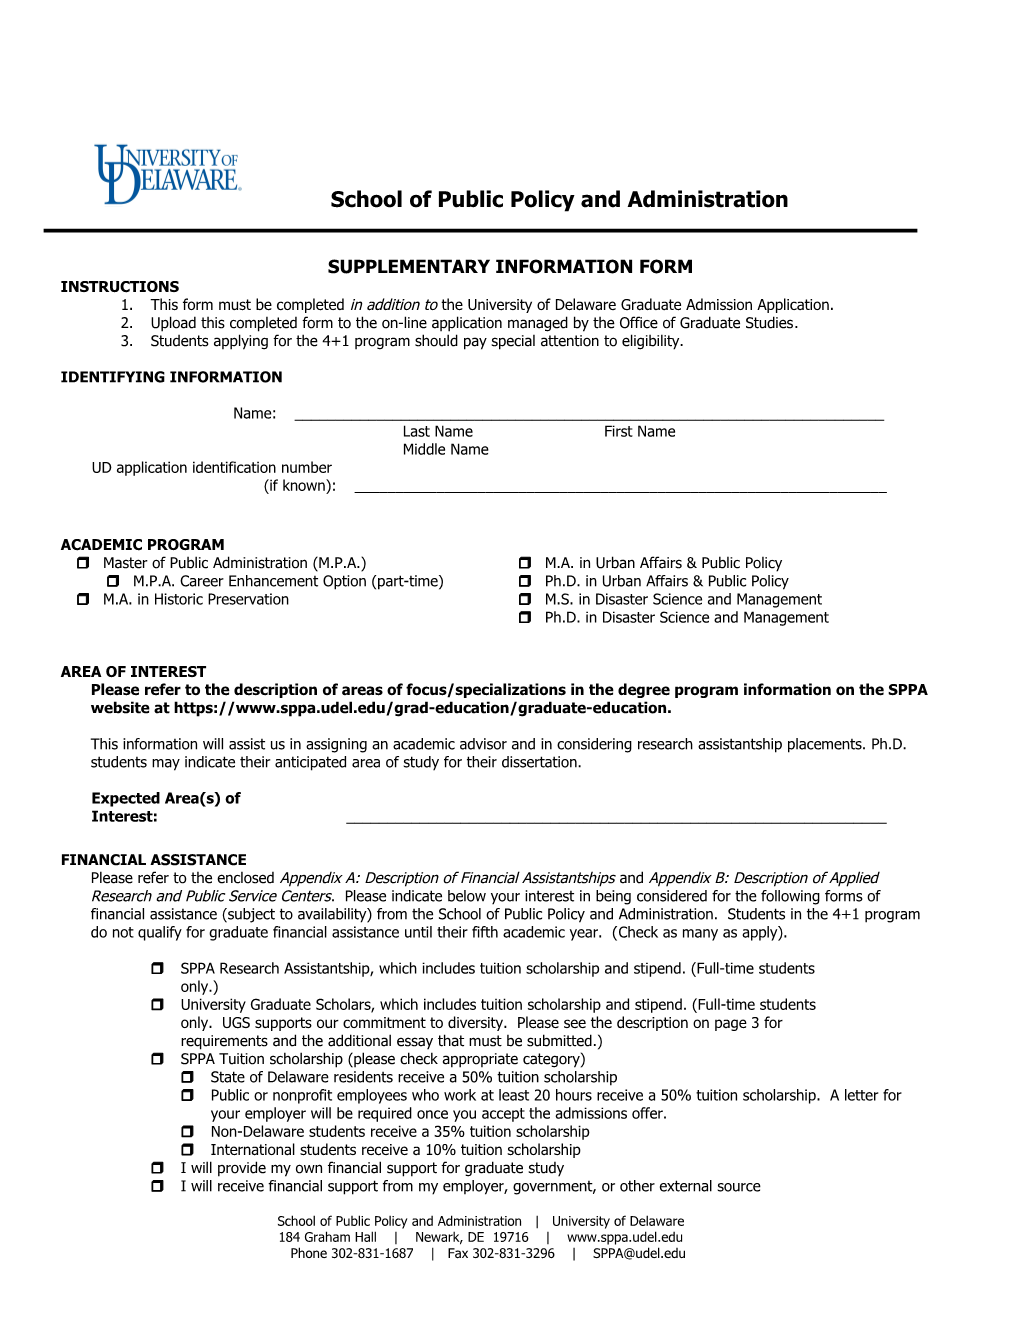 Supplementary Information Form for Graduate Applications